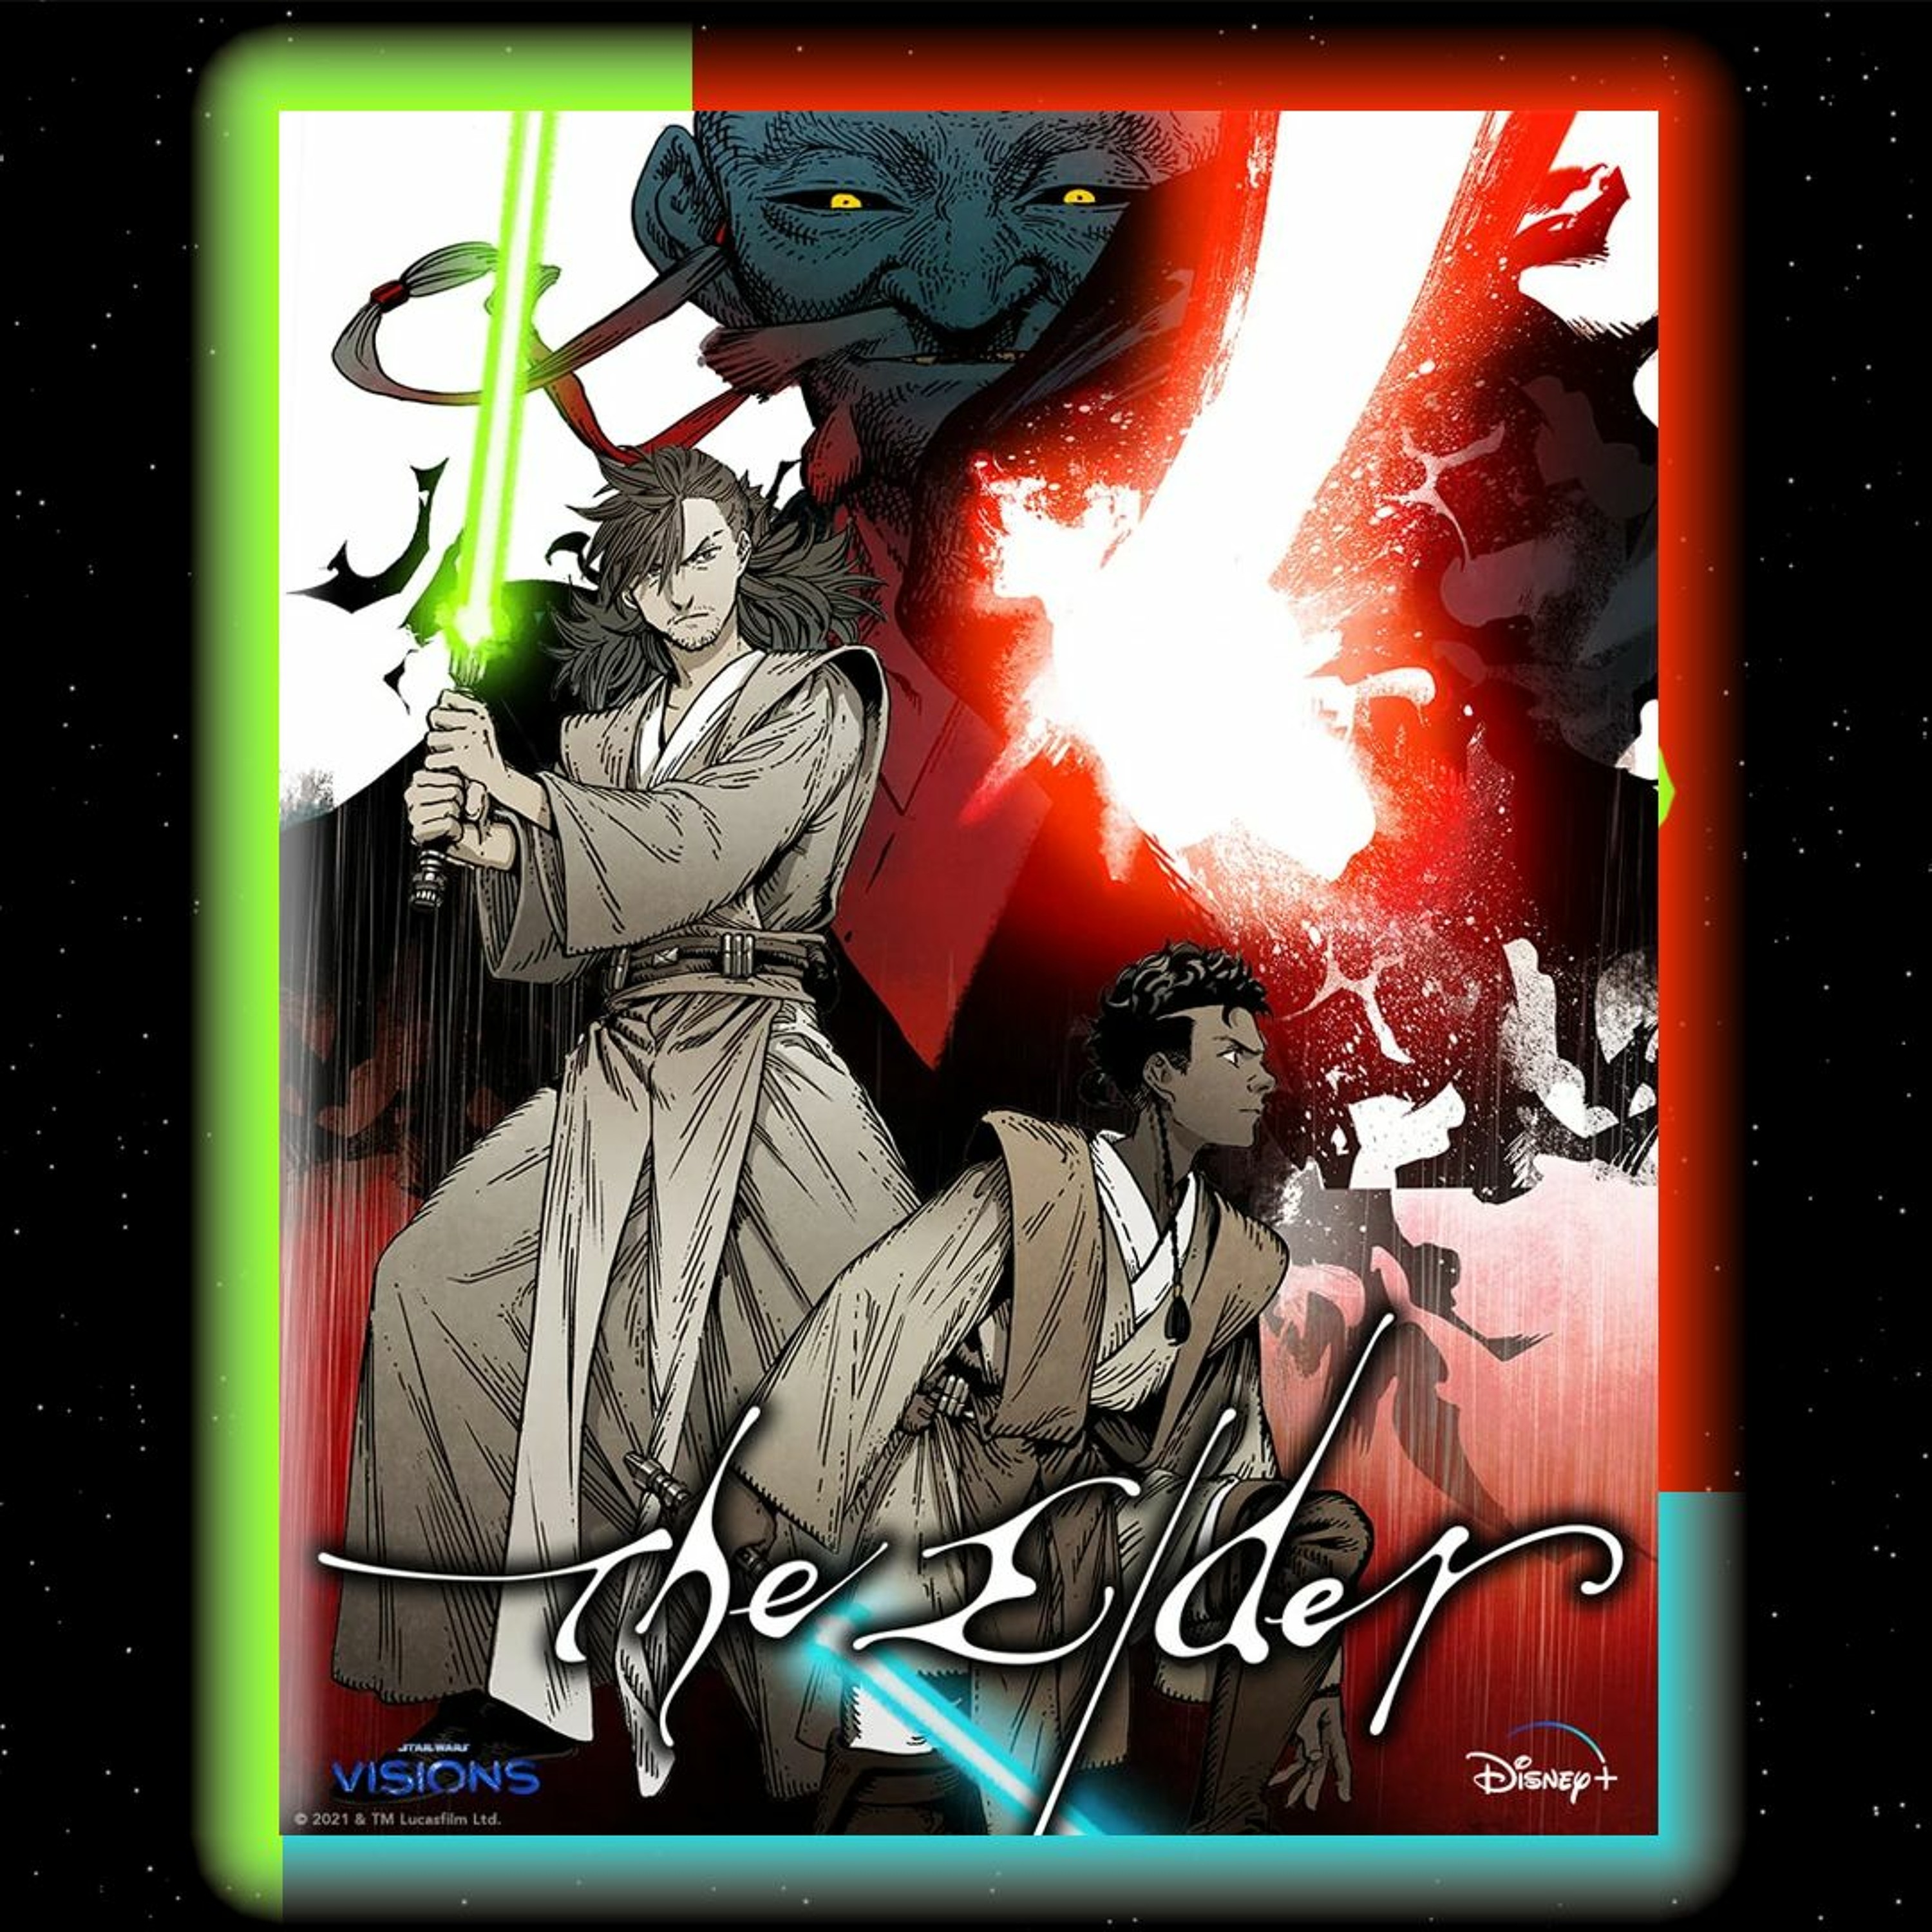 Star Wars Visions E7 - The Elder by Trigger Inc.